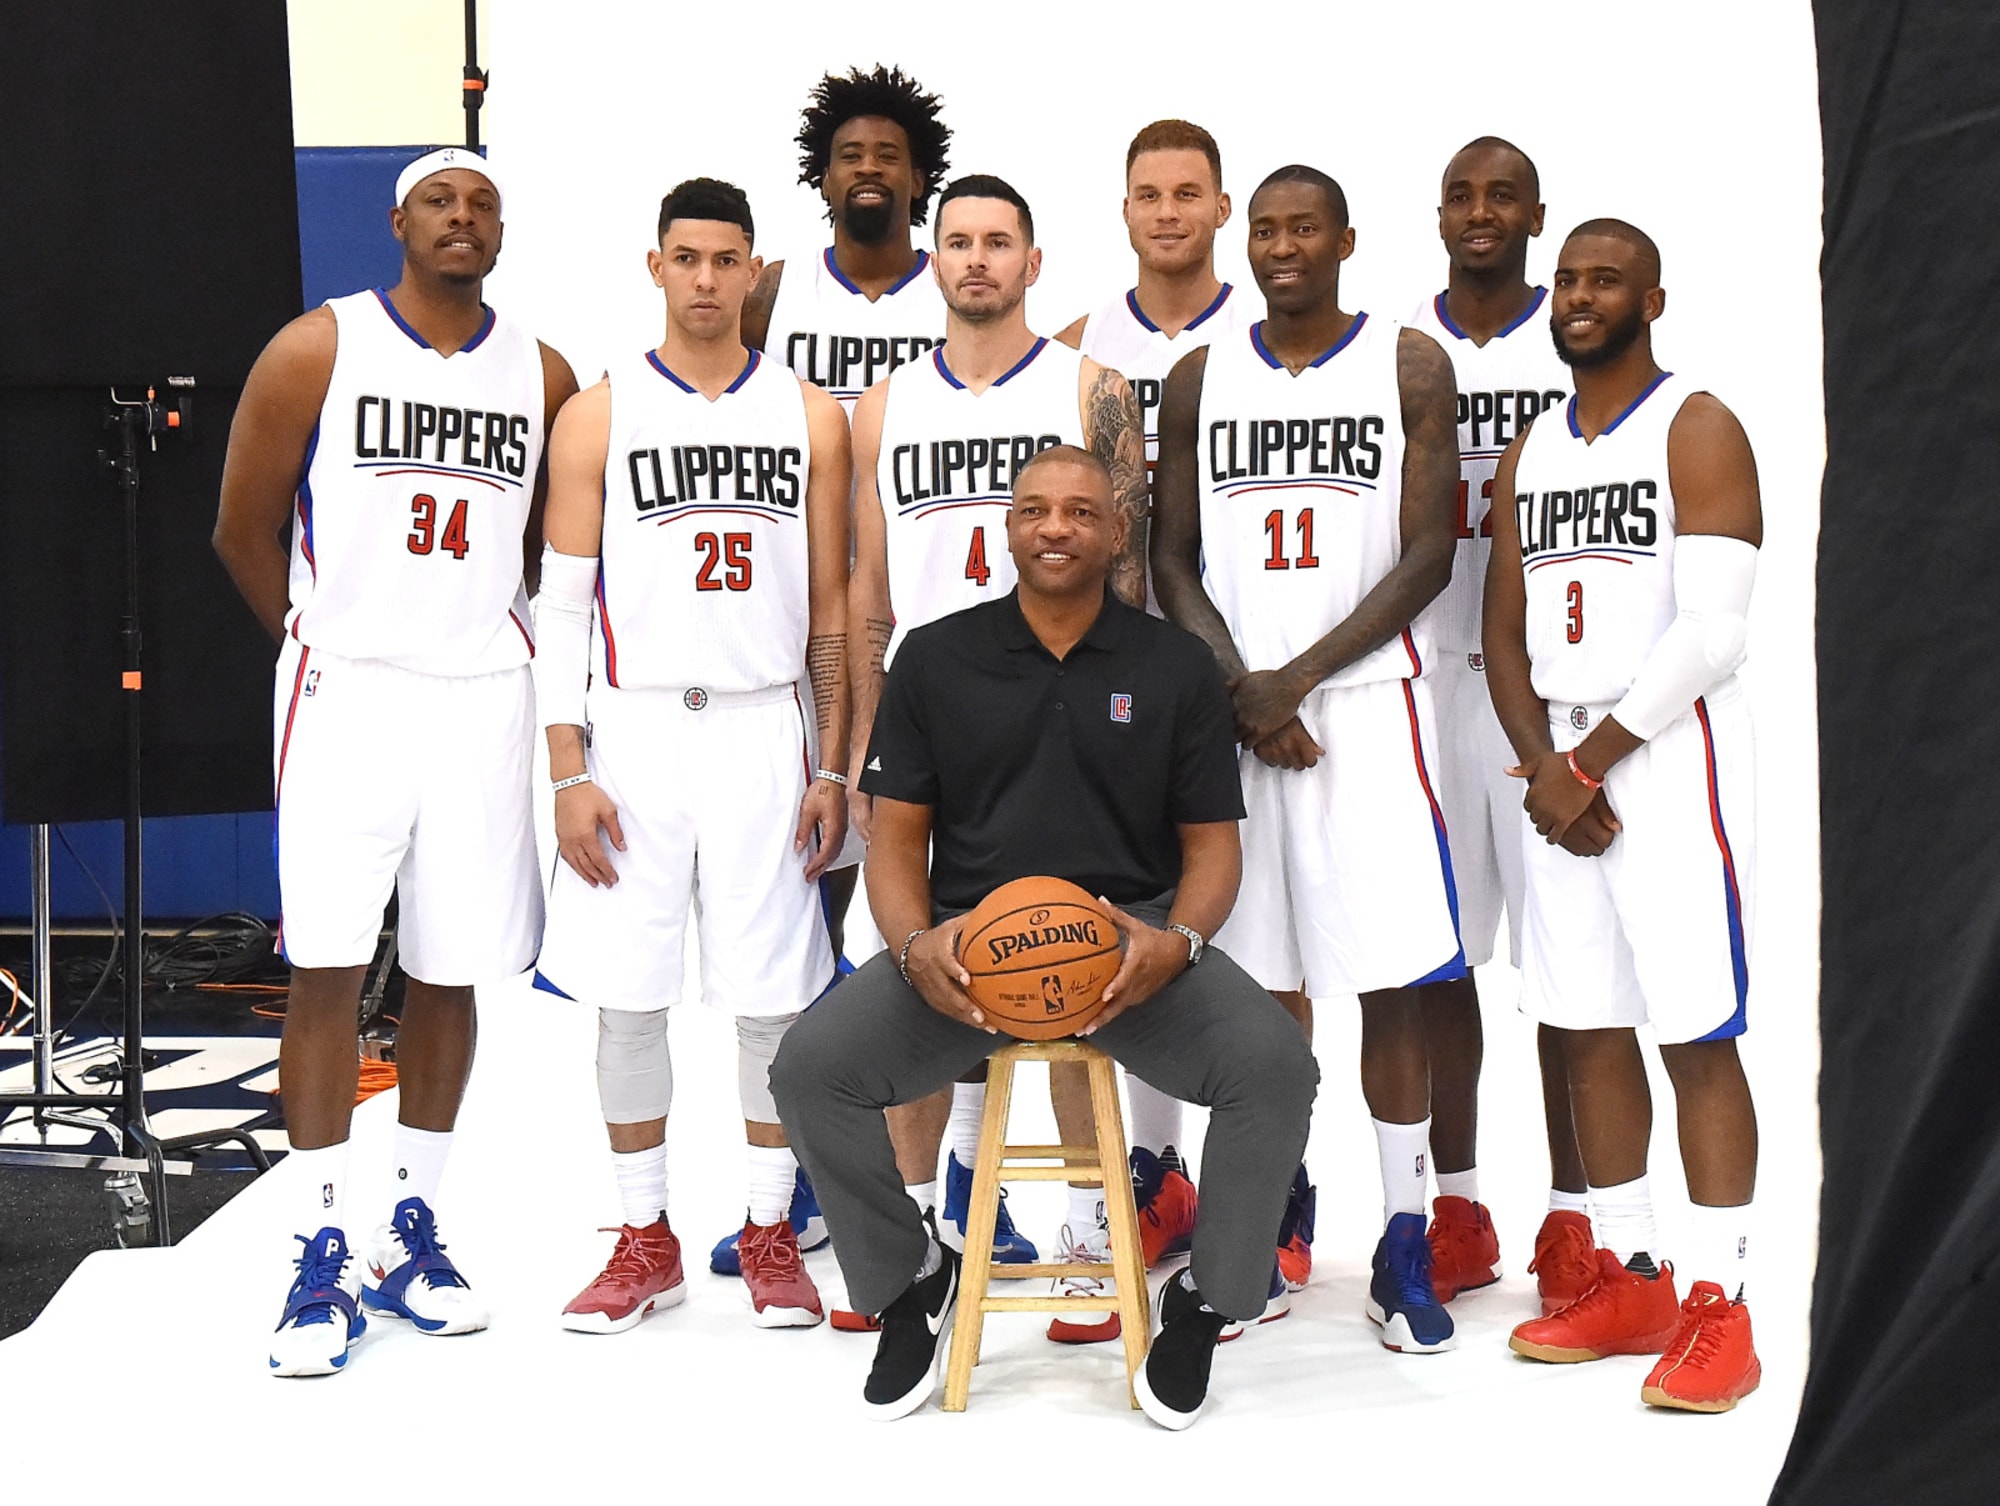 La Clippers Blueprint For Rebuilding Without Tanking